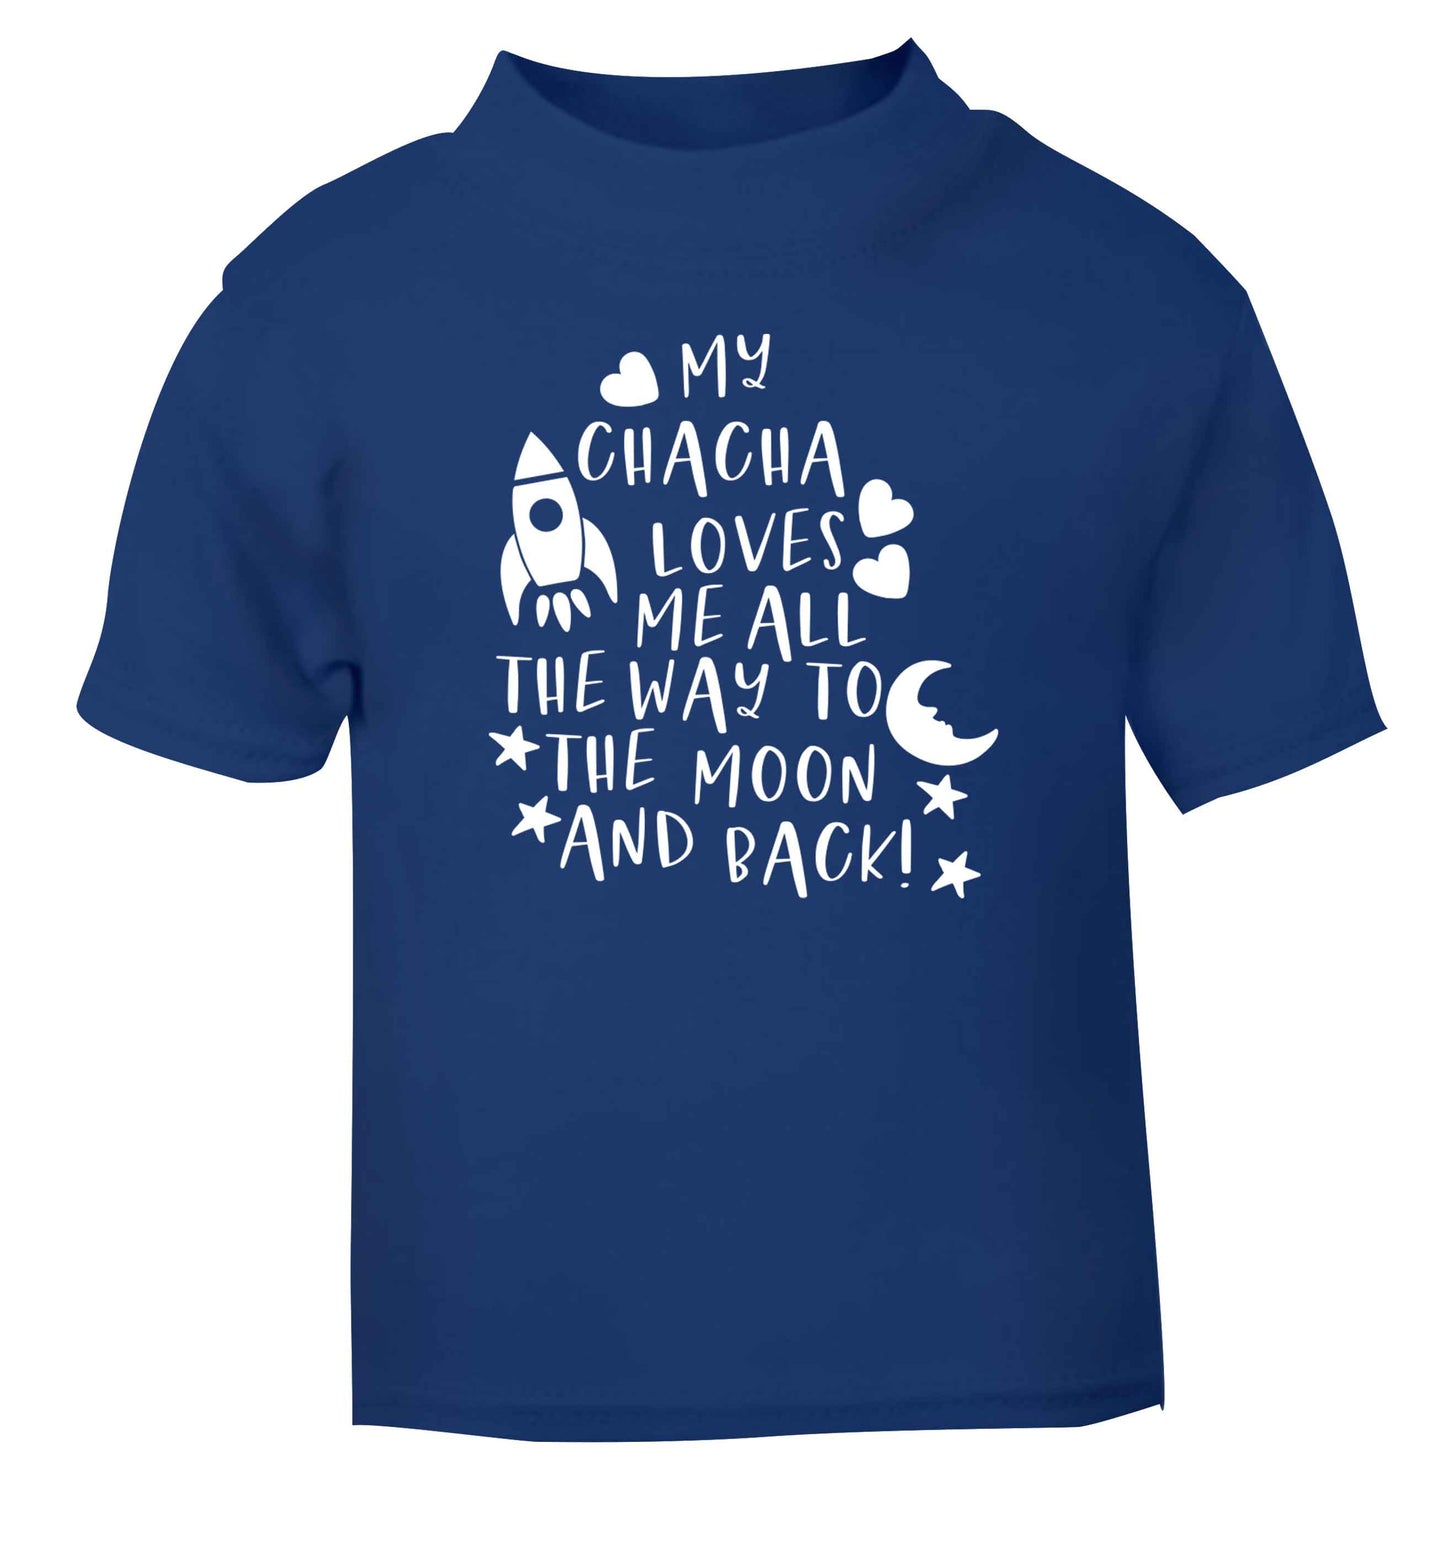 My chacha loves me all the way to the moon and back blue Baby Toddler Tshirt 2 Years